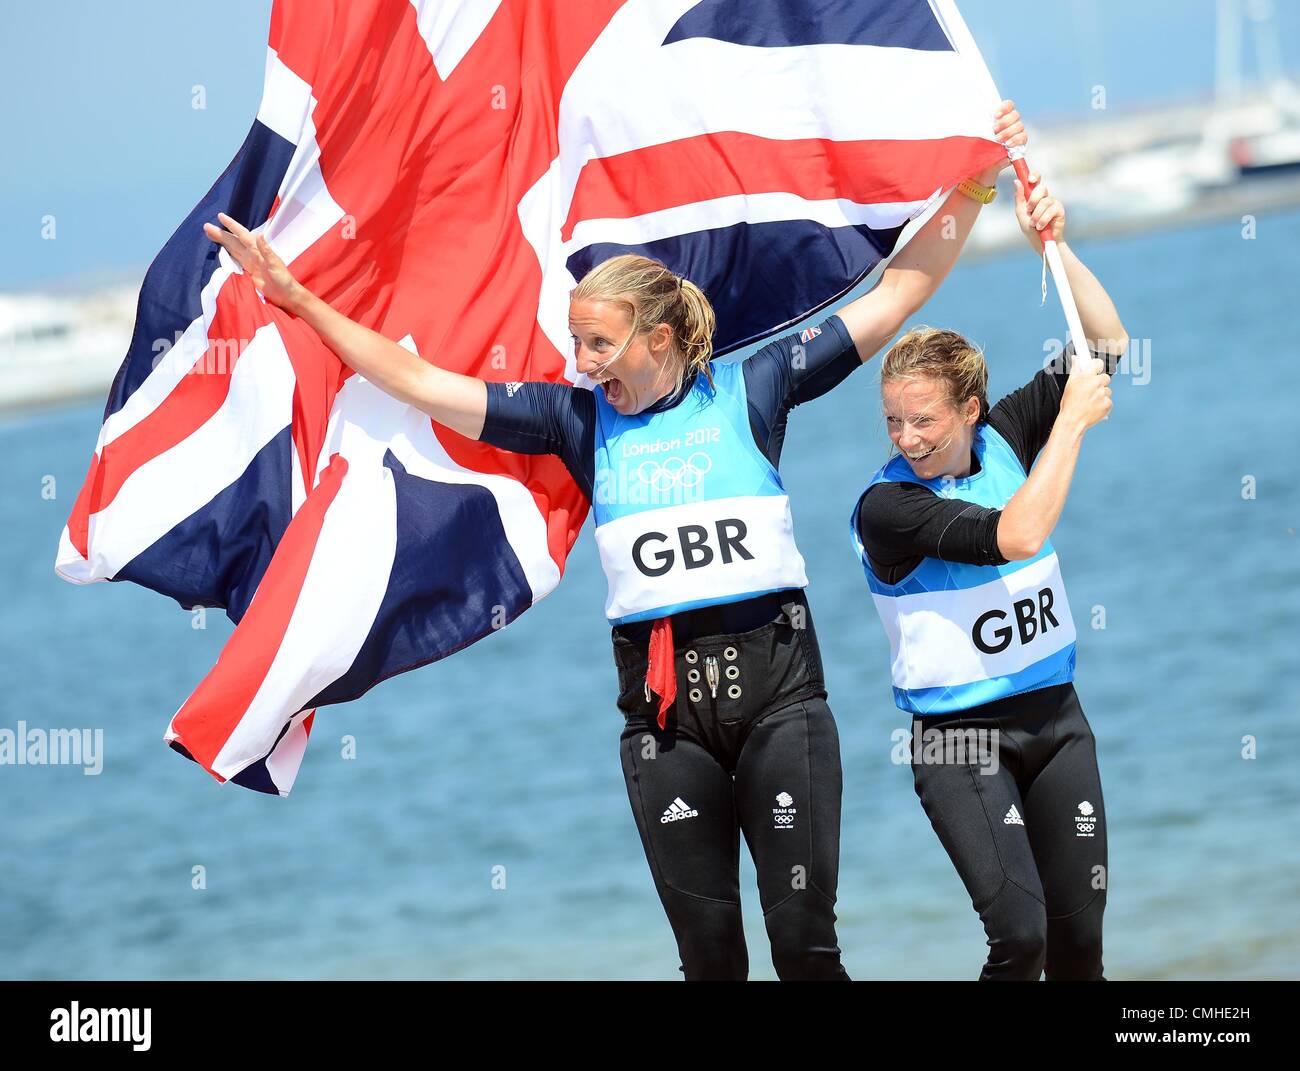 10th Aug 2012. London 2012 Olympics, Sailing at the Weymouth & Portland Venue, Dorset, Britain, UK.  August 10th, 2012 Women's 470 medal race silver medal winners, Saskia Mills and Hannah Mills of Great Britain PICTURE: DORSET MEDIA SERVICE Stock Photo